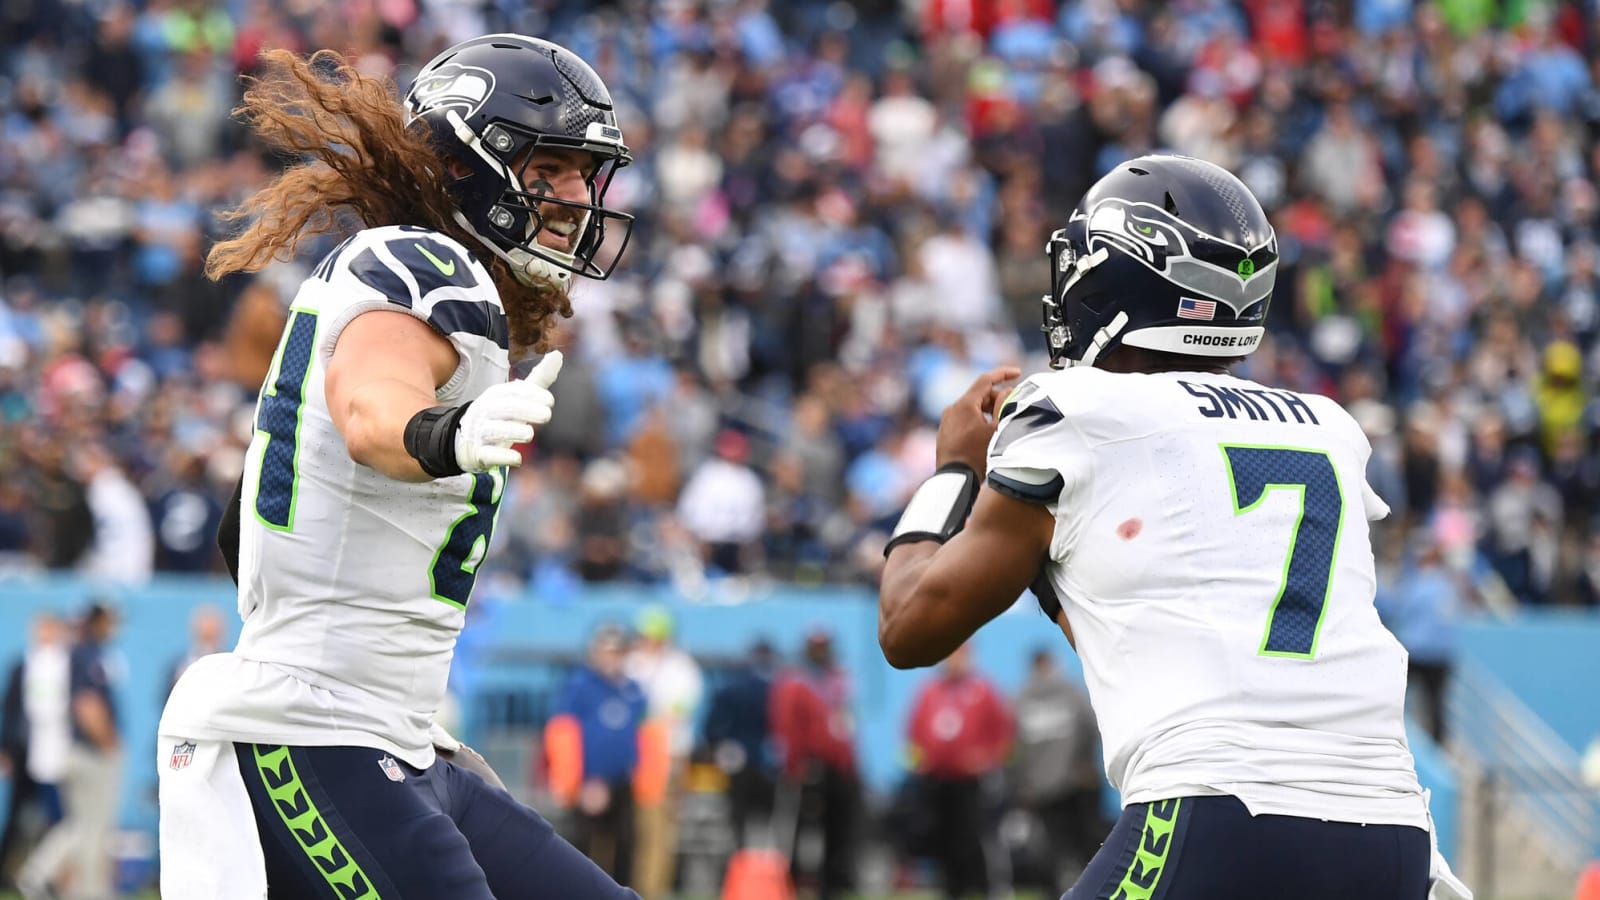 Watch: Seahawks win on another last-minute TD